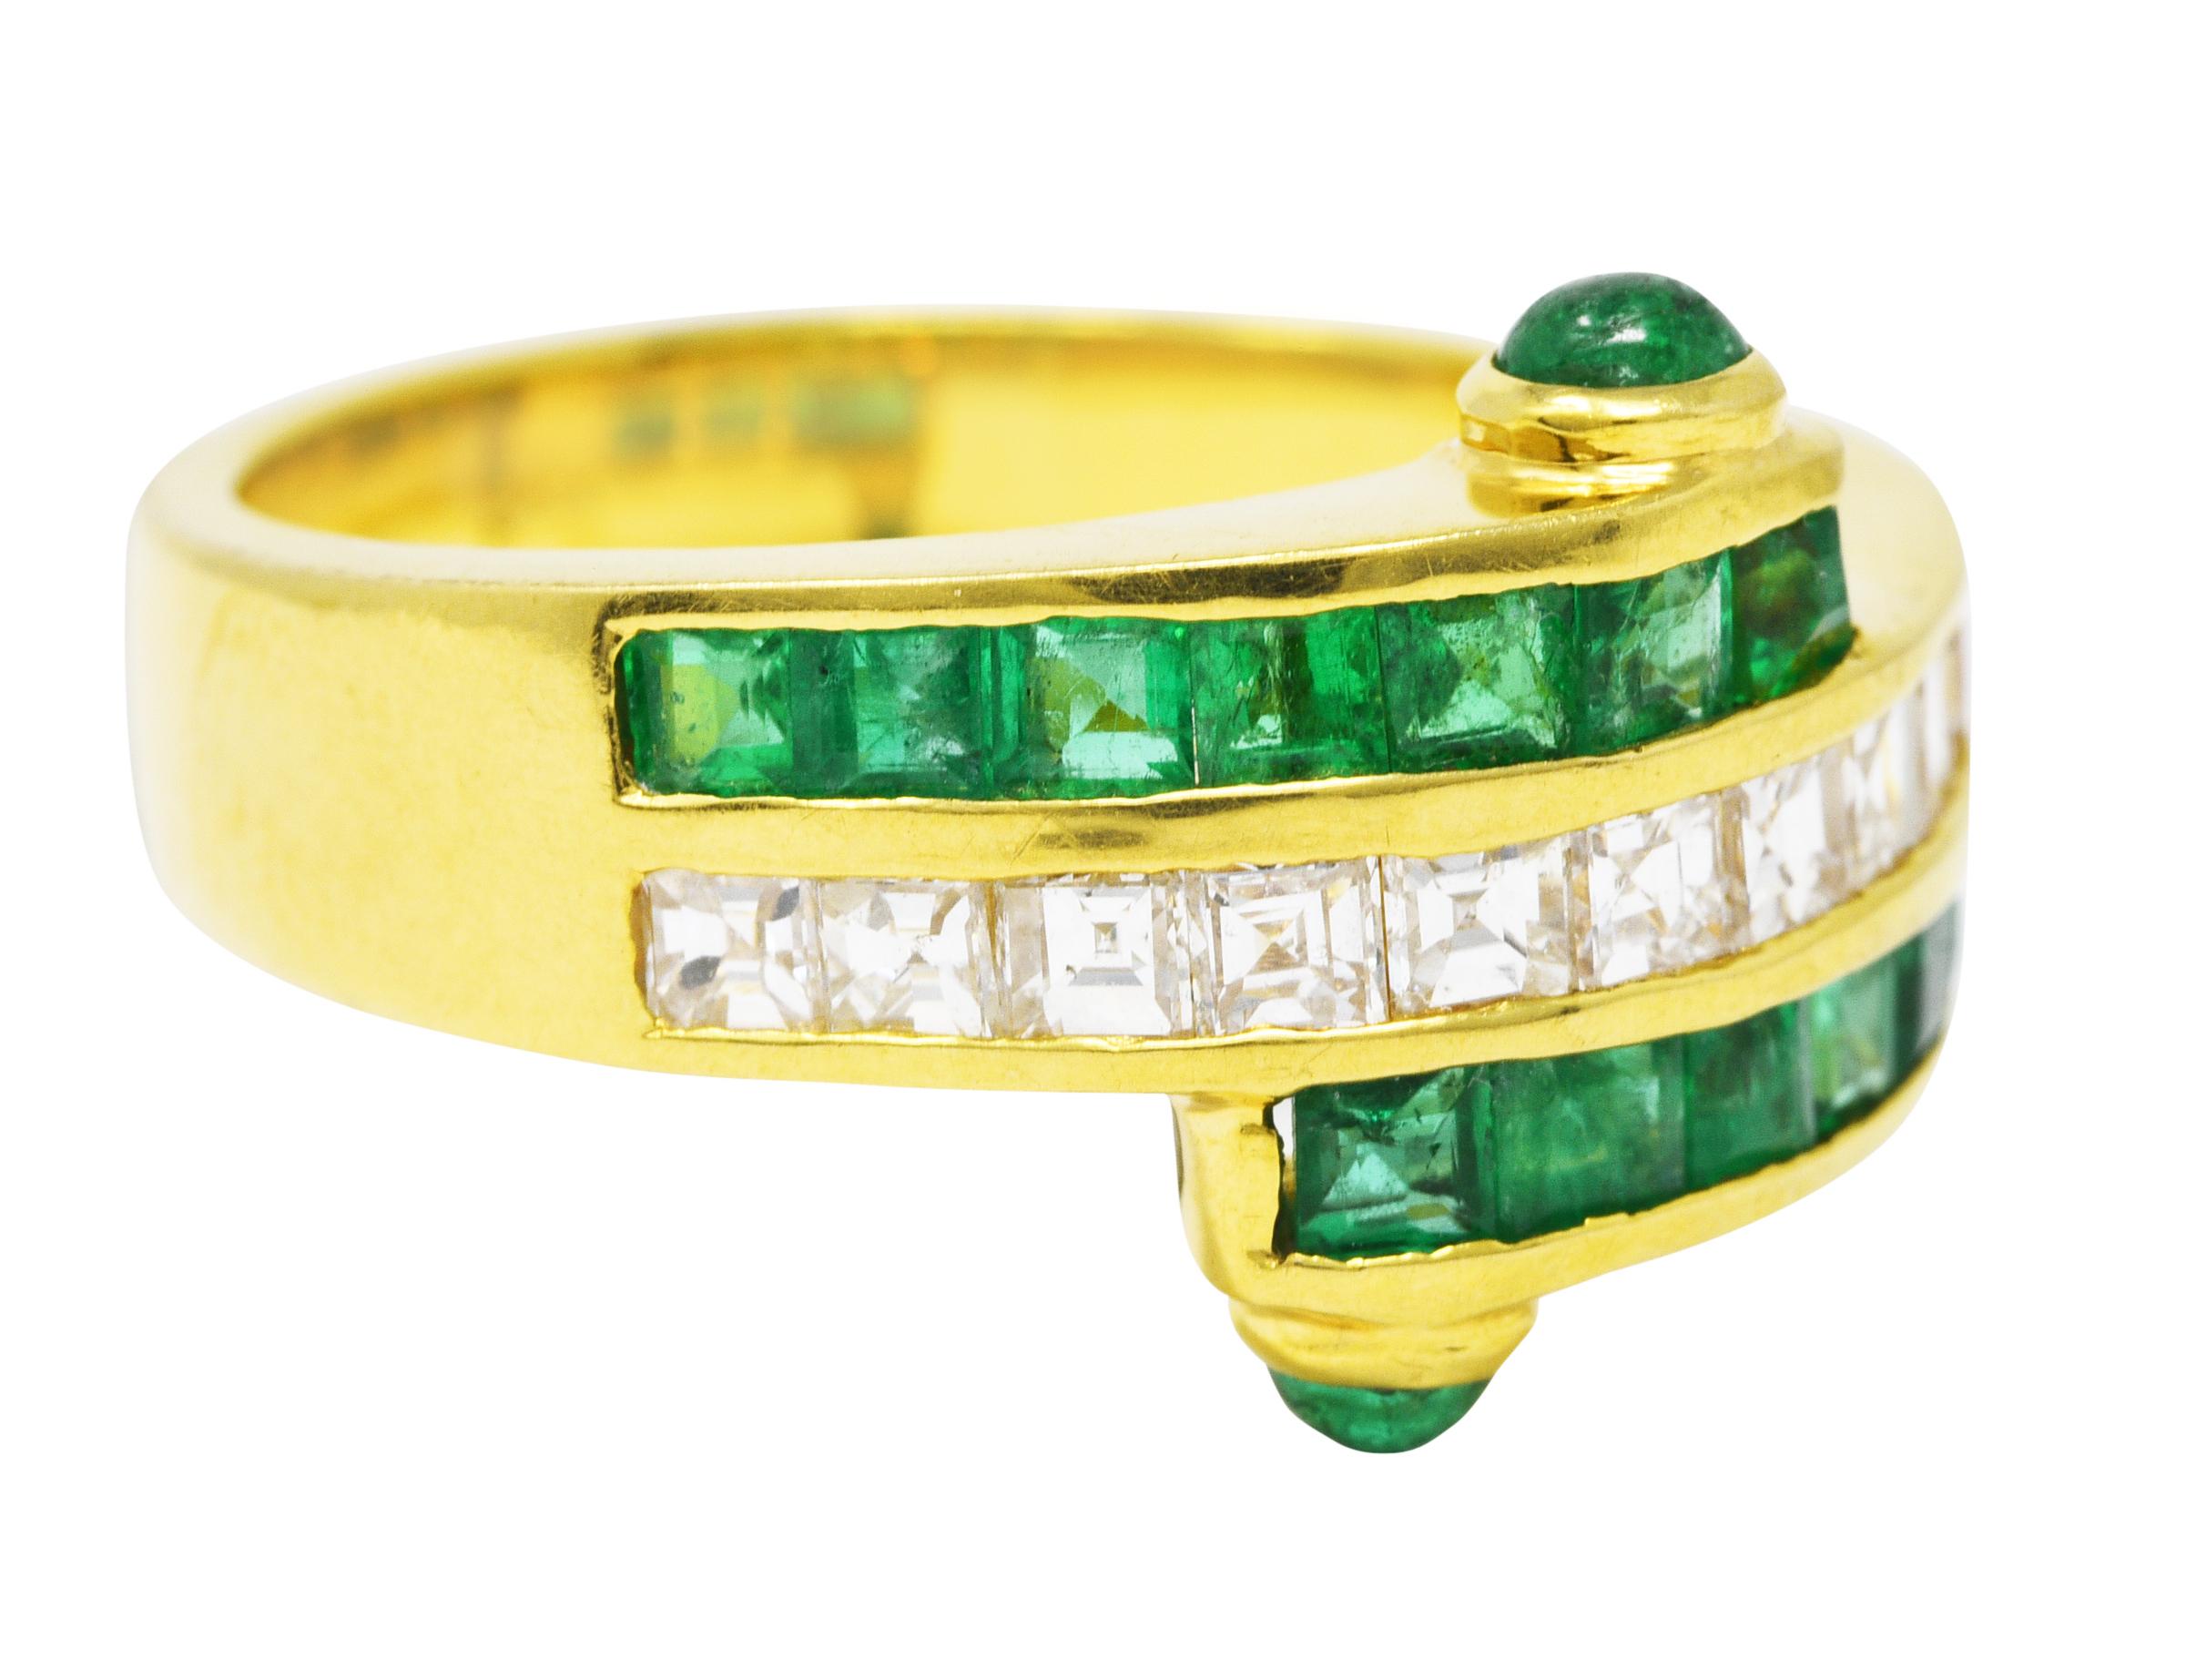 Bypass ring is comprised of three adjacent channels. Central row features square step cut diamonds. Weighing in total approximately 0.50 carat - G/H color with VS clarity. Remaining channels feature square cut emeralds with emerald cabochon